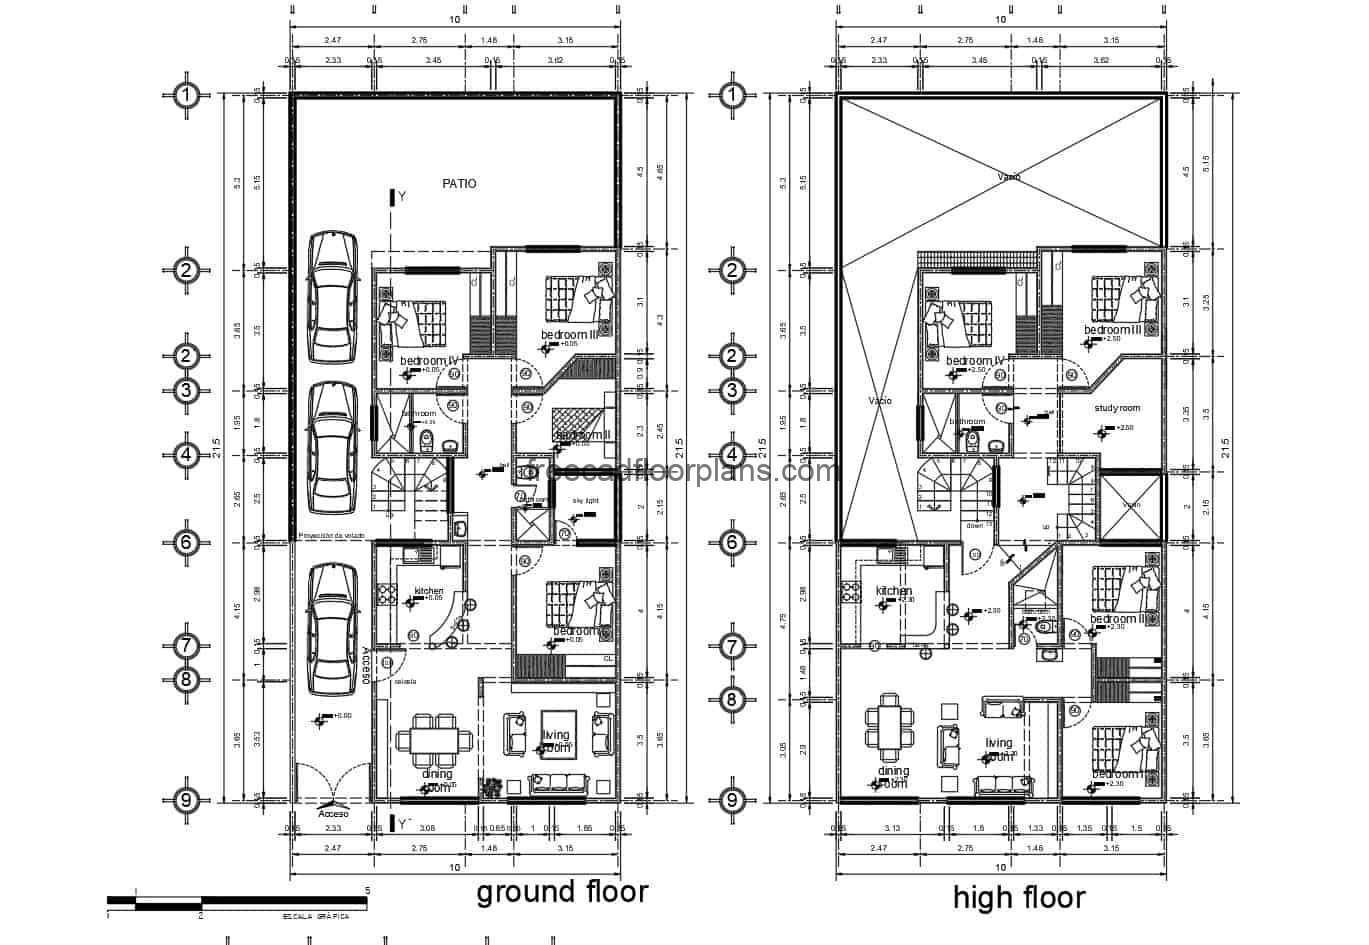 Project of plans in Autocad, of two houses in the same structure in different levels of four rooms each one, plans with details, architectural and dimensioned, facades and sections for unloading free in format DWG